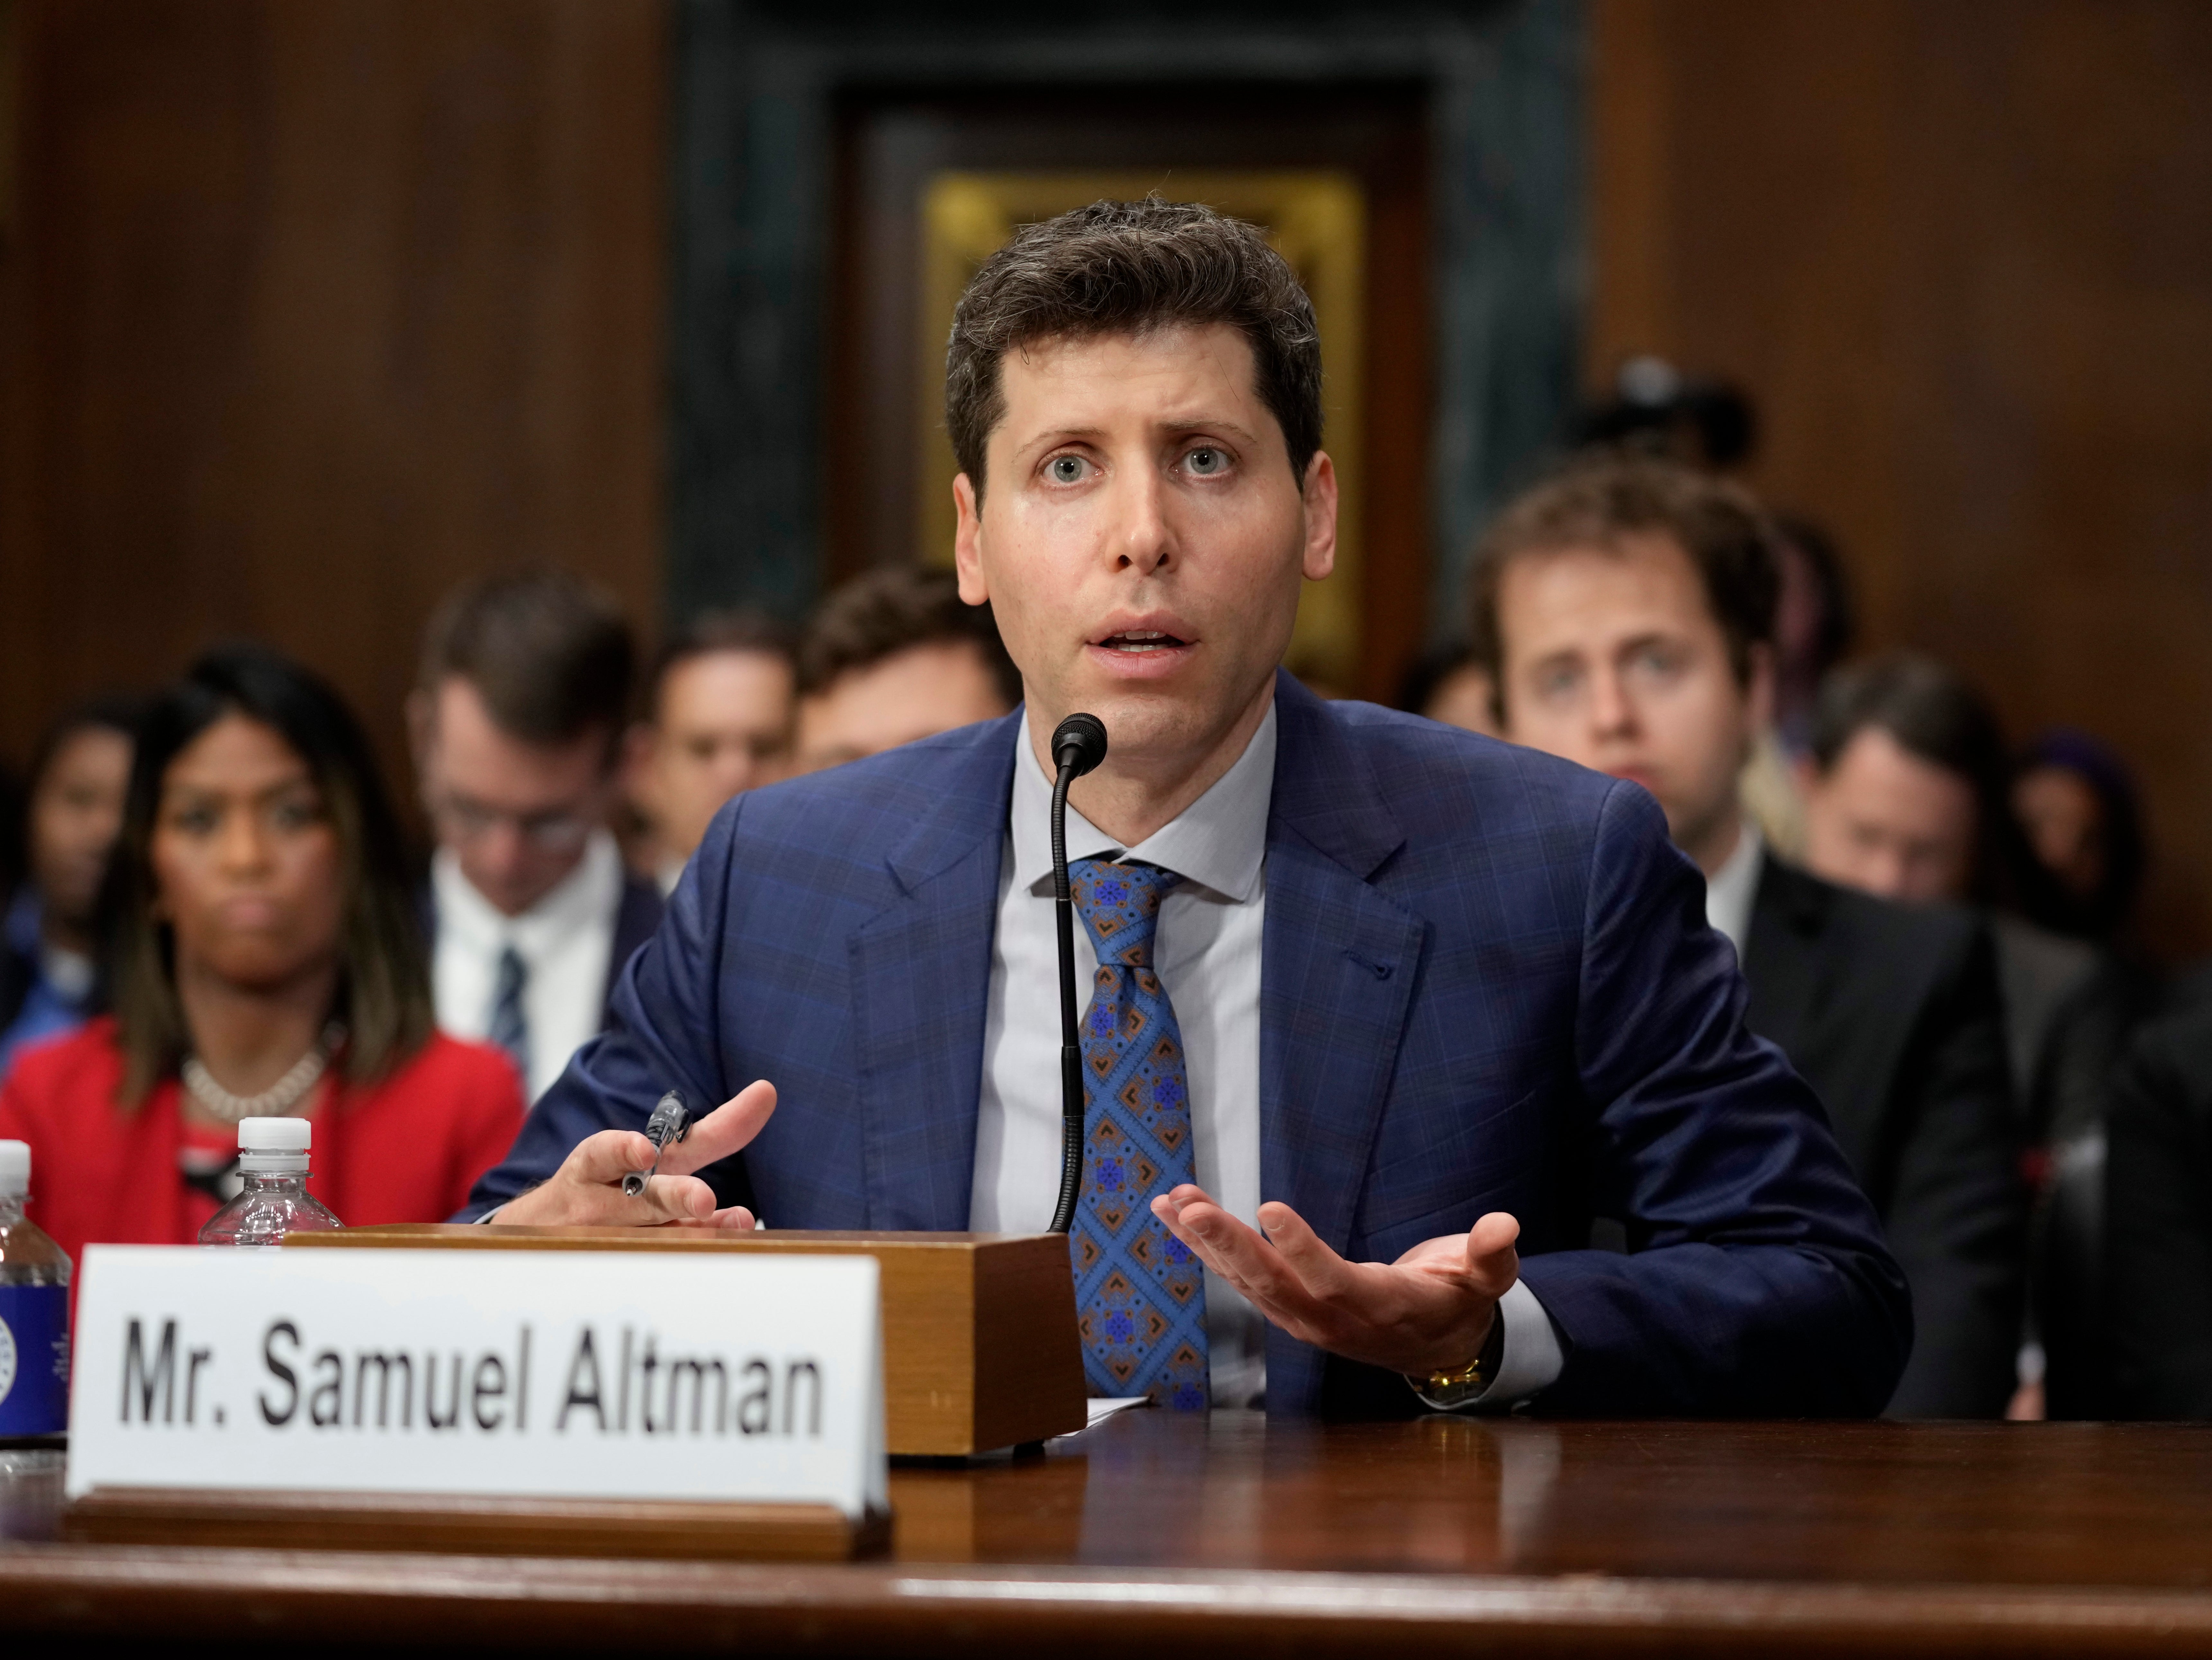 Sam Altman of Open AI officially launches Worldcoin project.